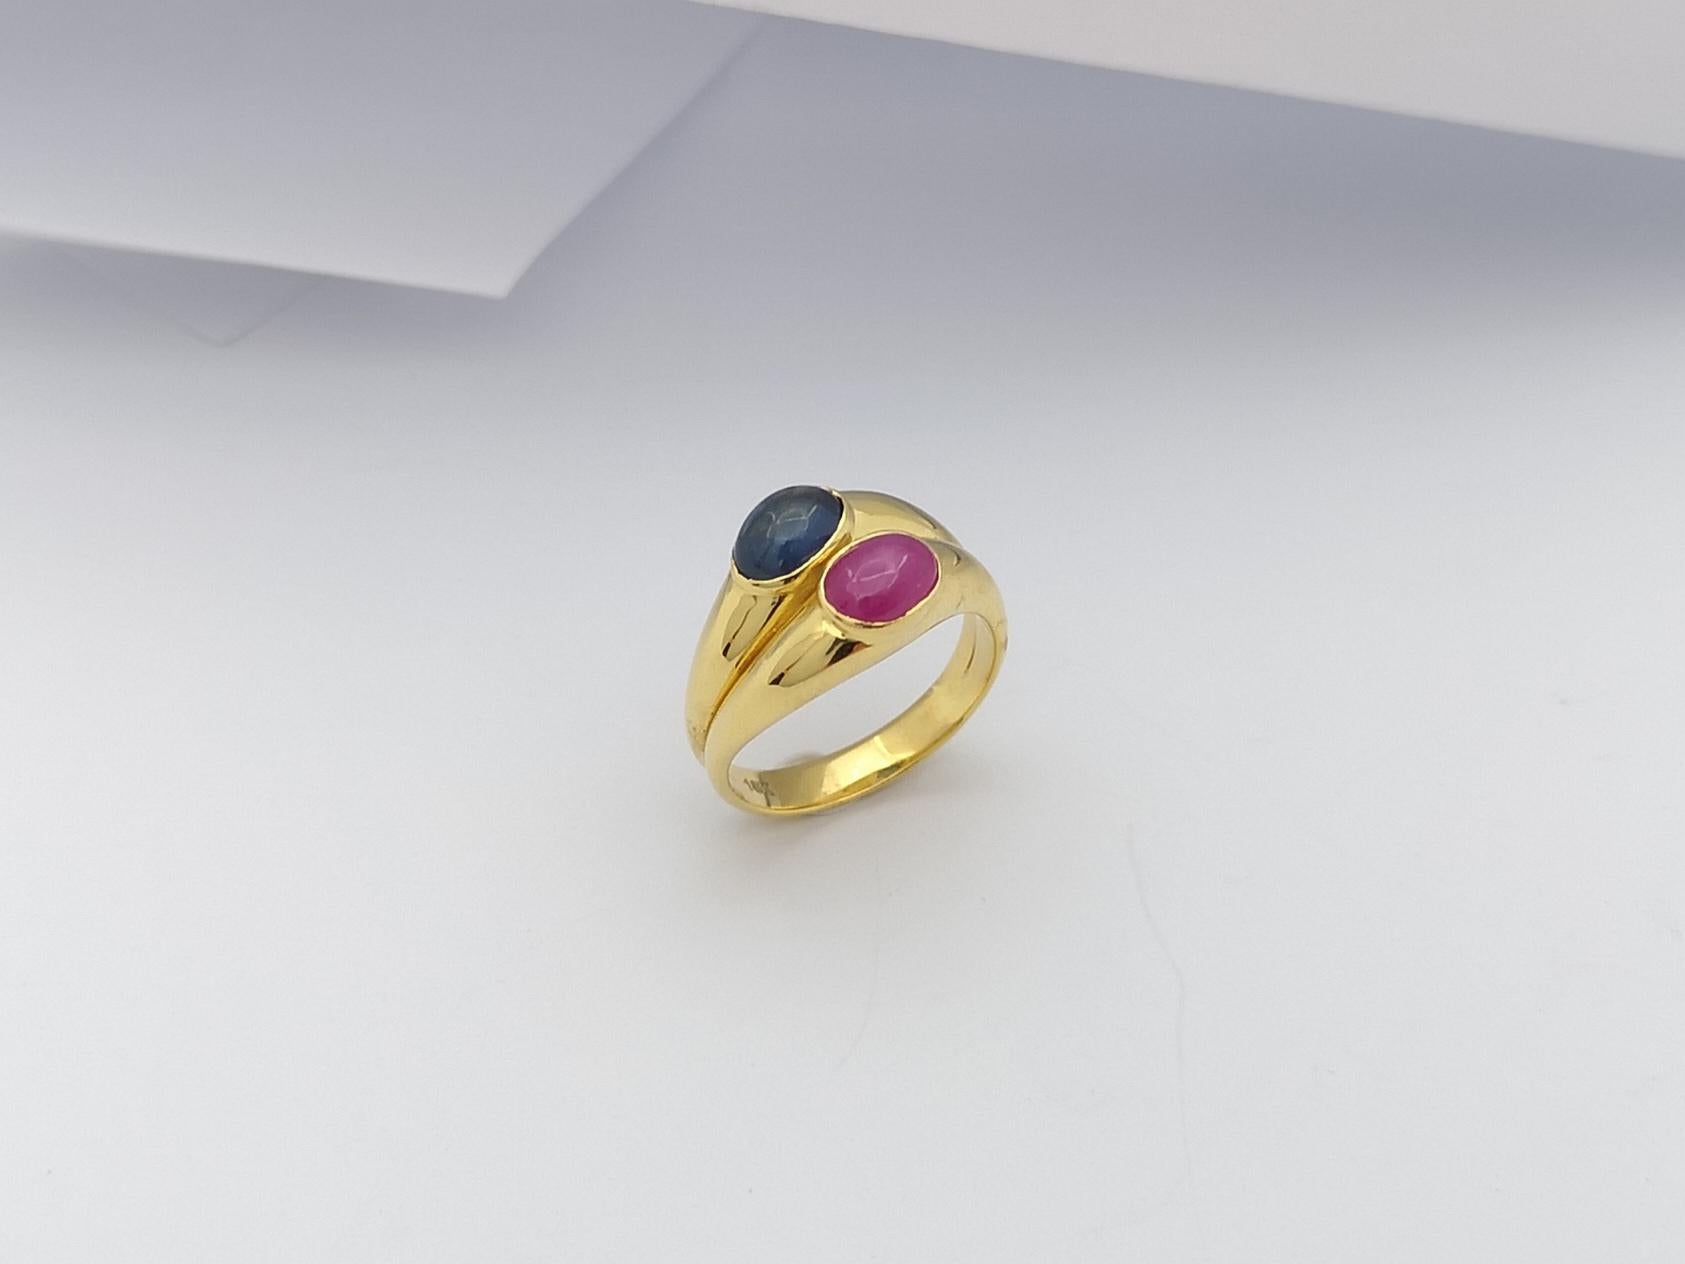 Cabochon Ruby and Cabochon Blue Sapphire Ring Set in 18 Karat Gold Settings For Sale 9